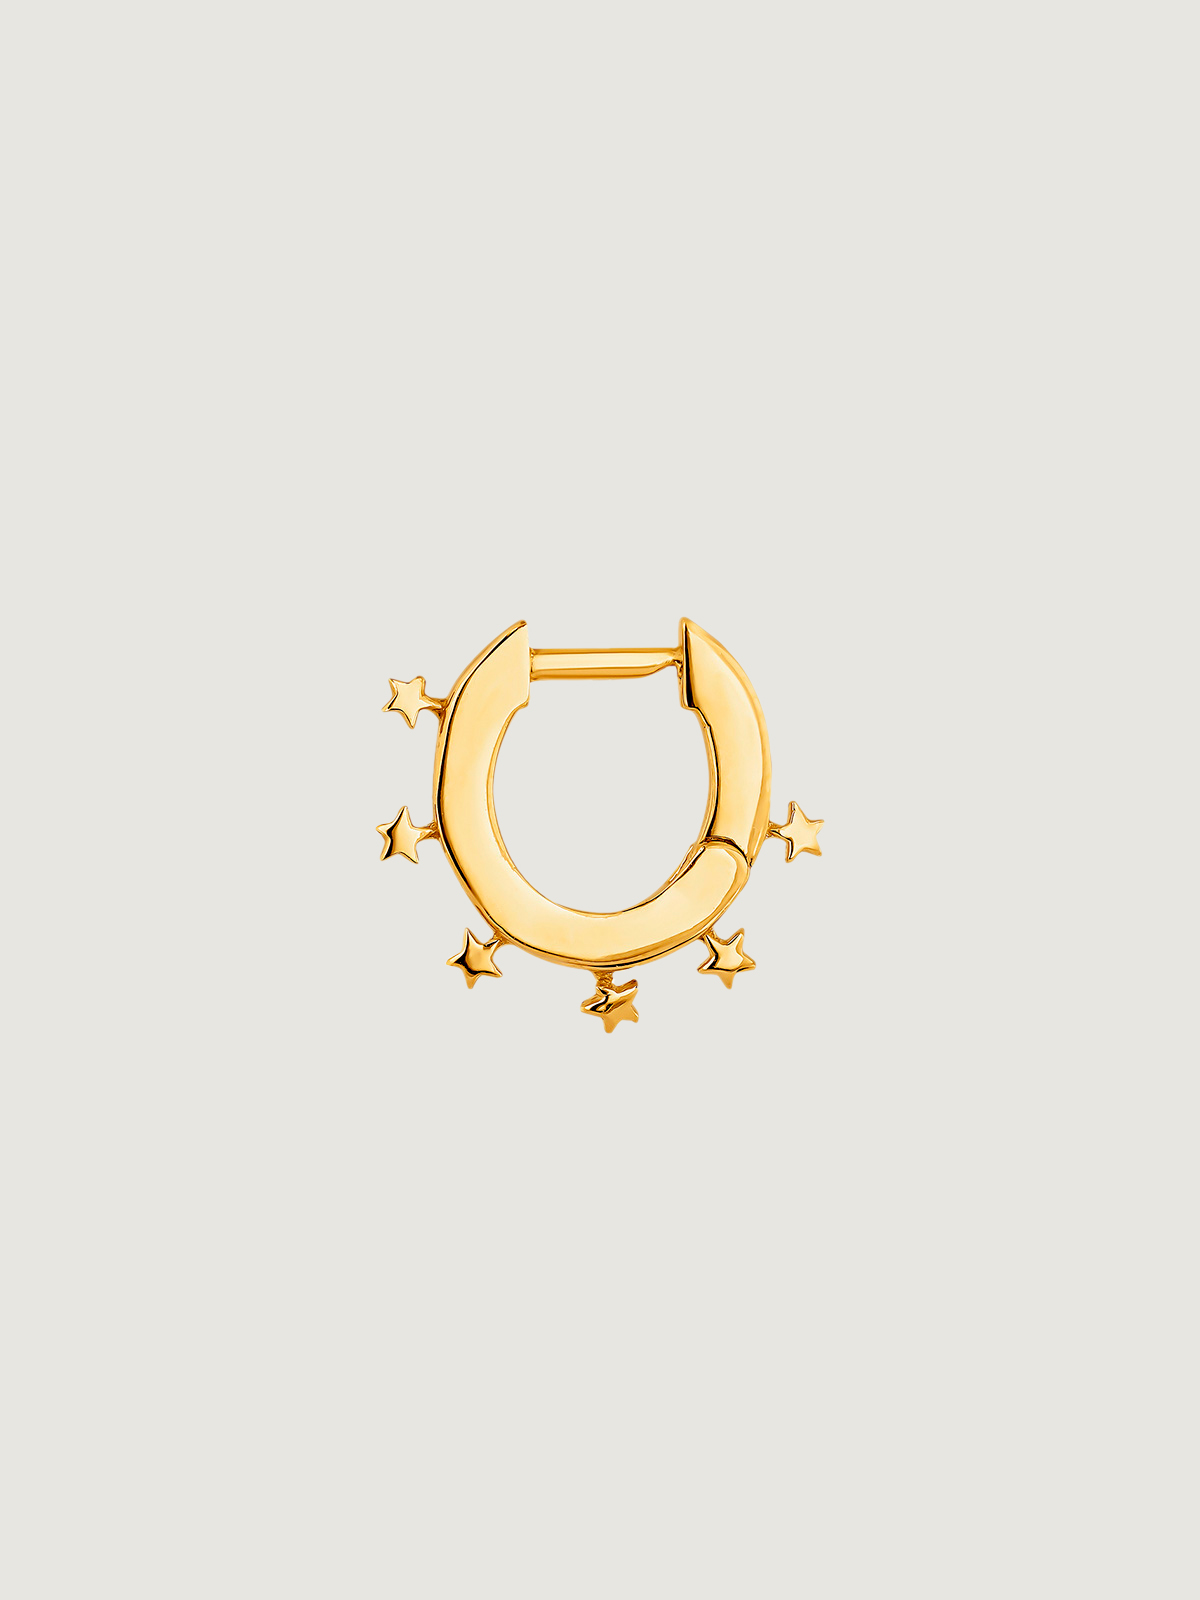 Individual small hoop earring made of 925 silver, bathed in 18K yellow gold with stars.